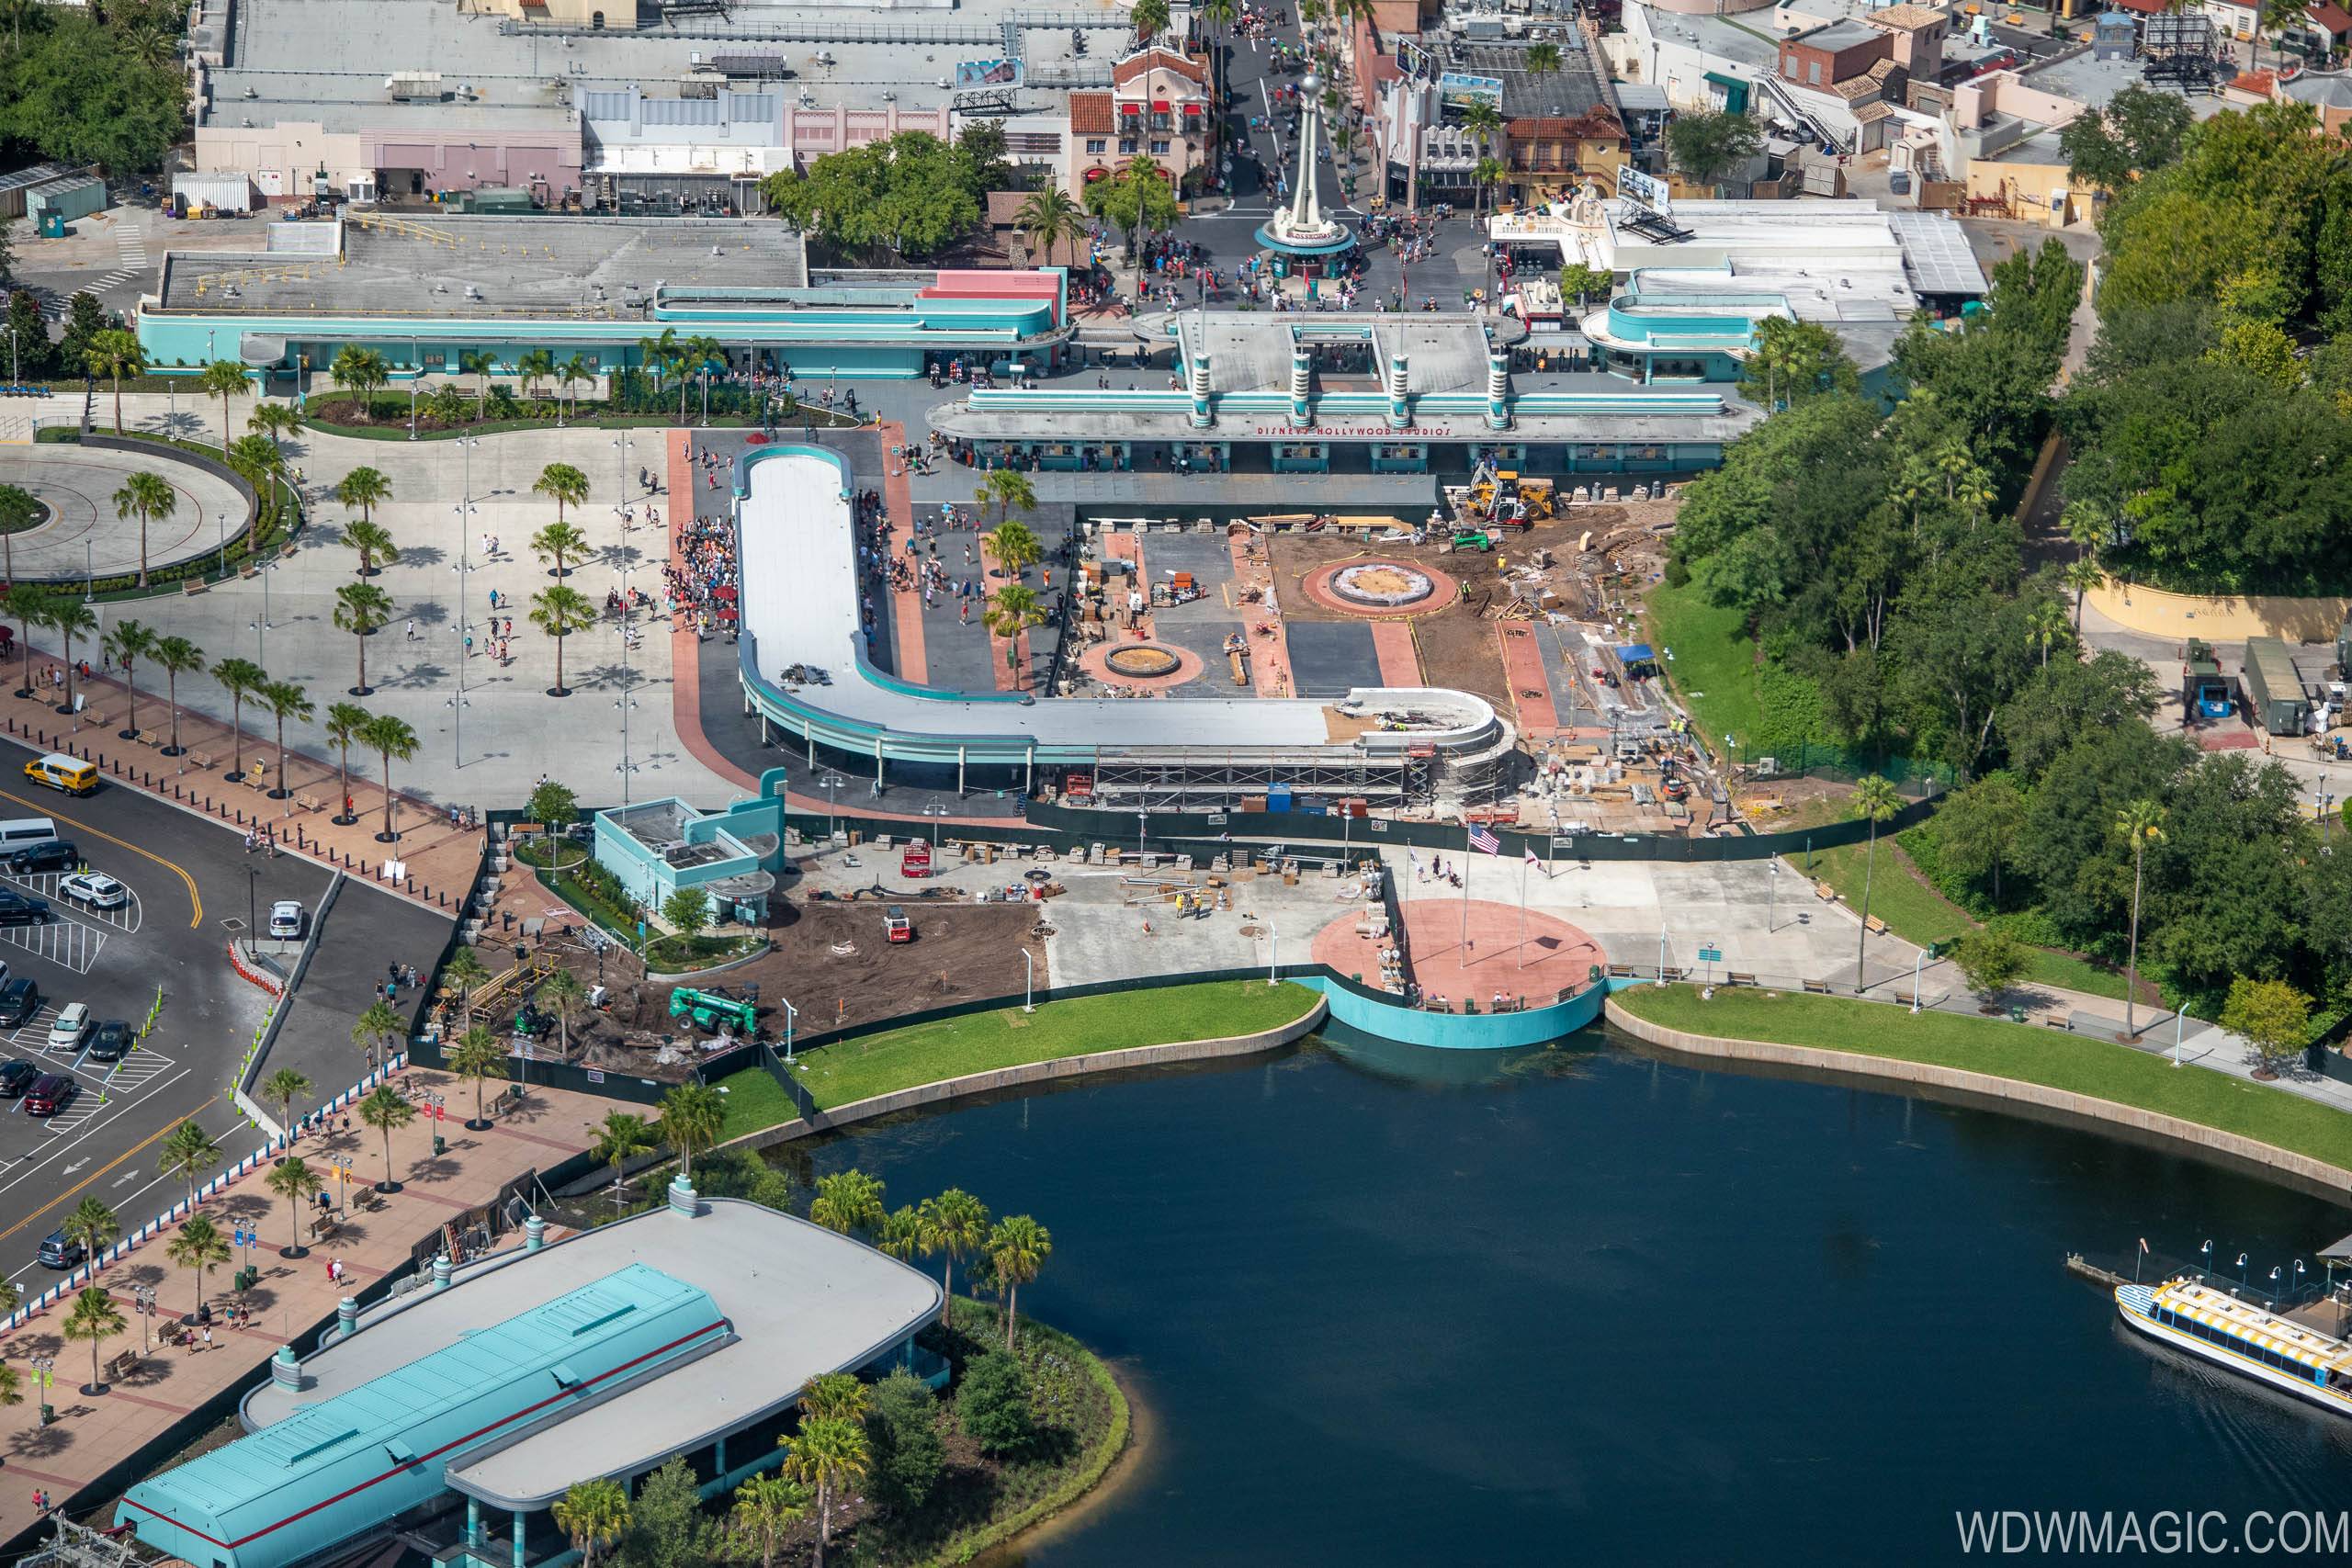 PHOTOS - Work continues on the main entrance at Disney's Hollywood Studios